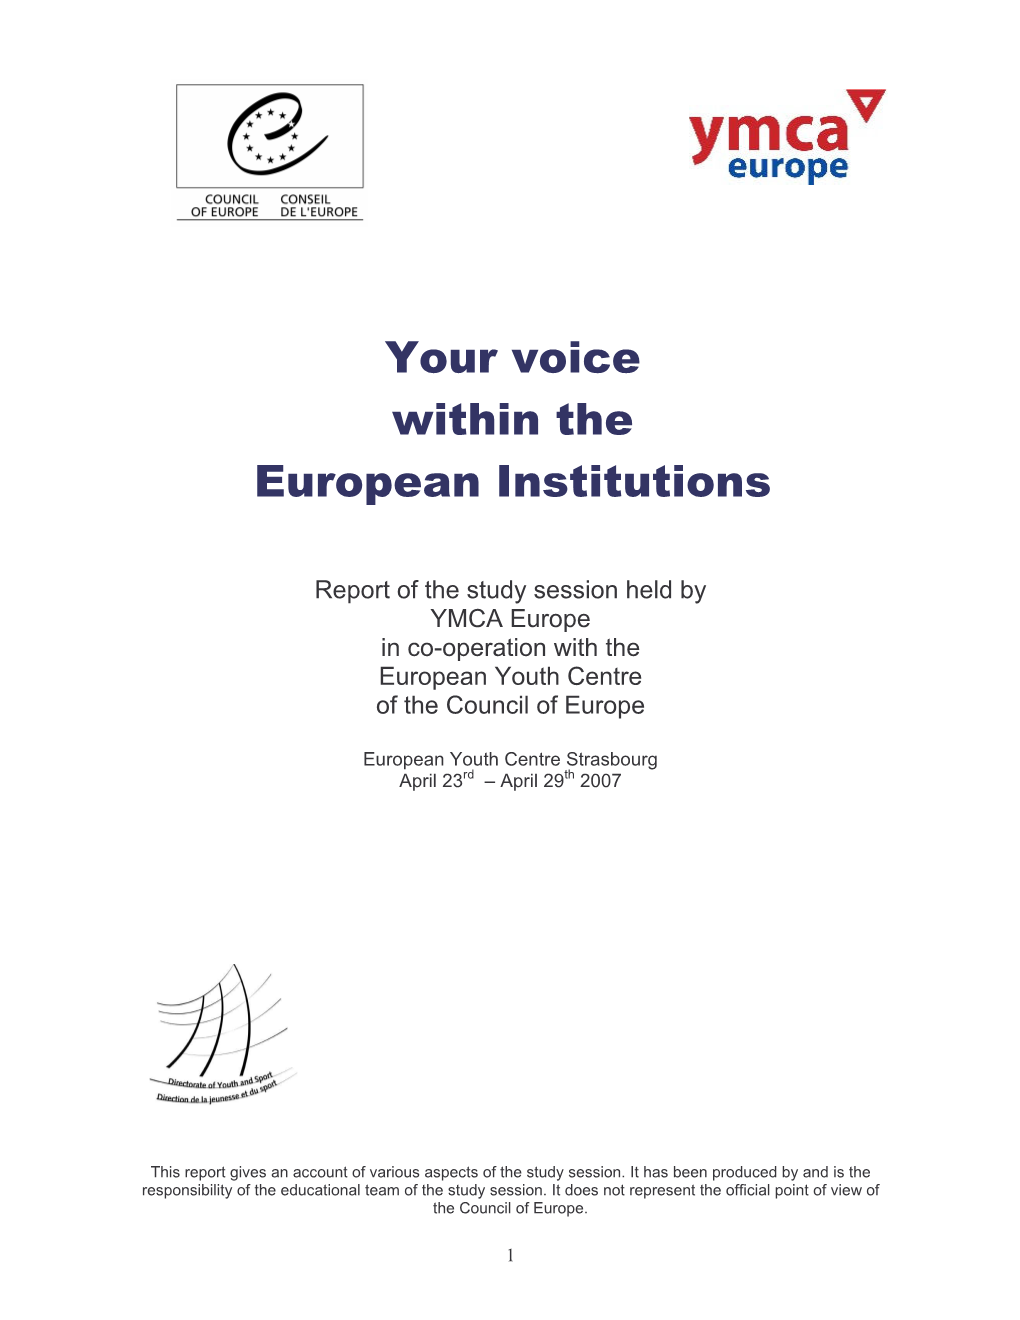 Your Voice Within the European Institutions“